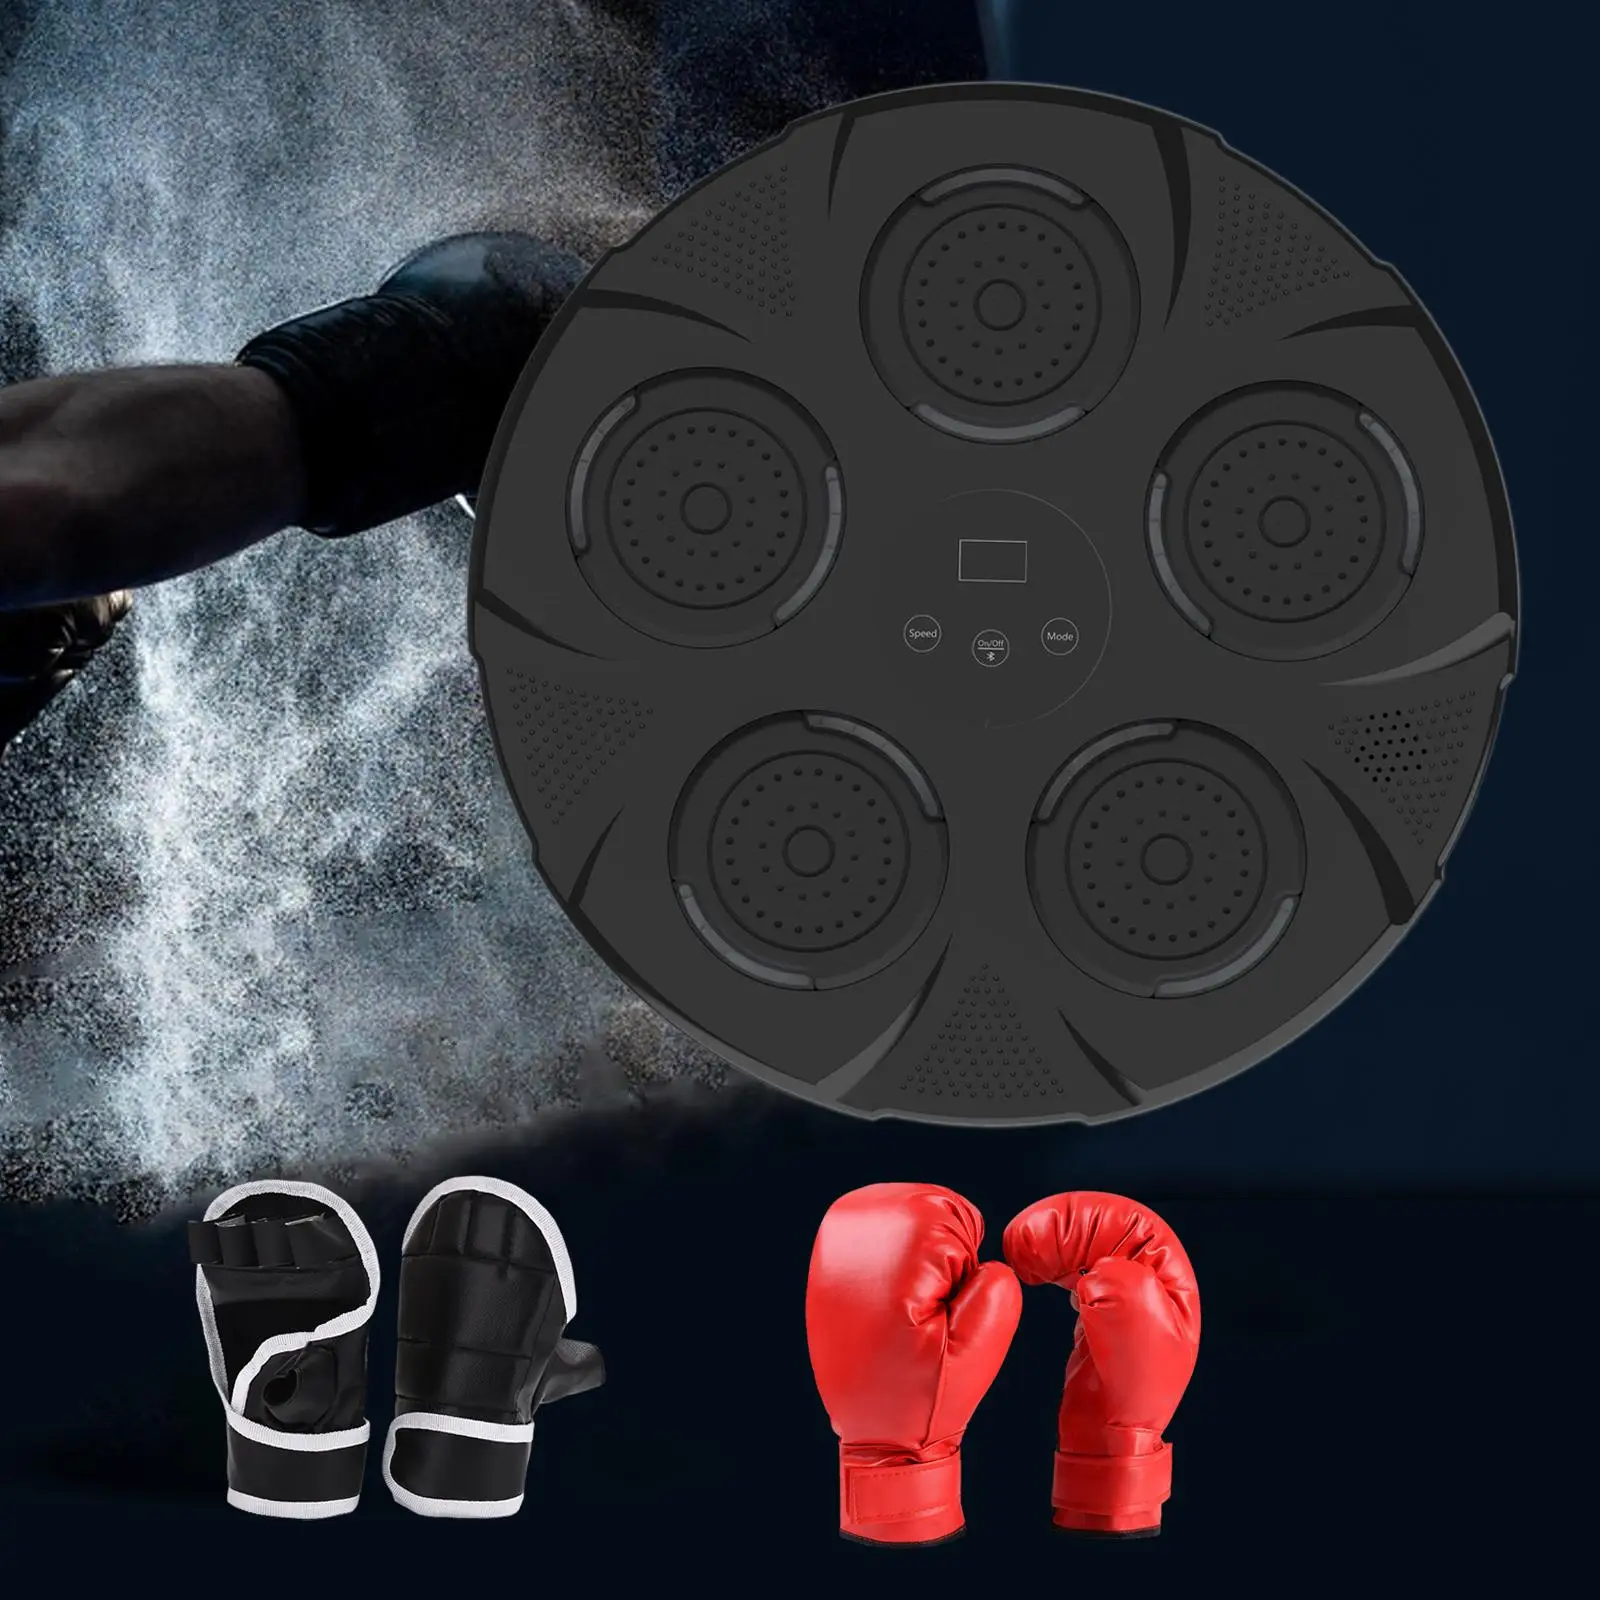 Music Boxing Machine with Counting Function Adjustable Music Boxing Target for Focus Sanda Taekwondo Martial Arts Home Indoor